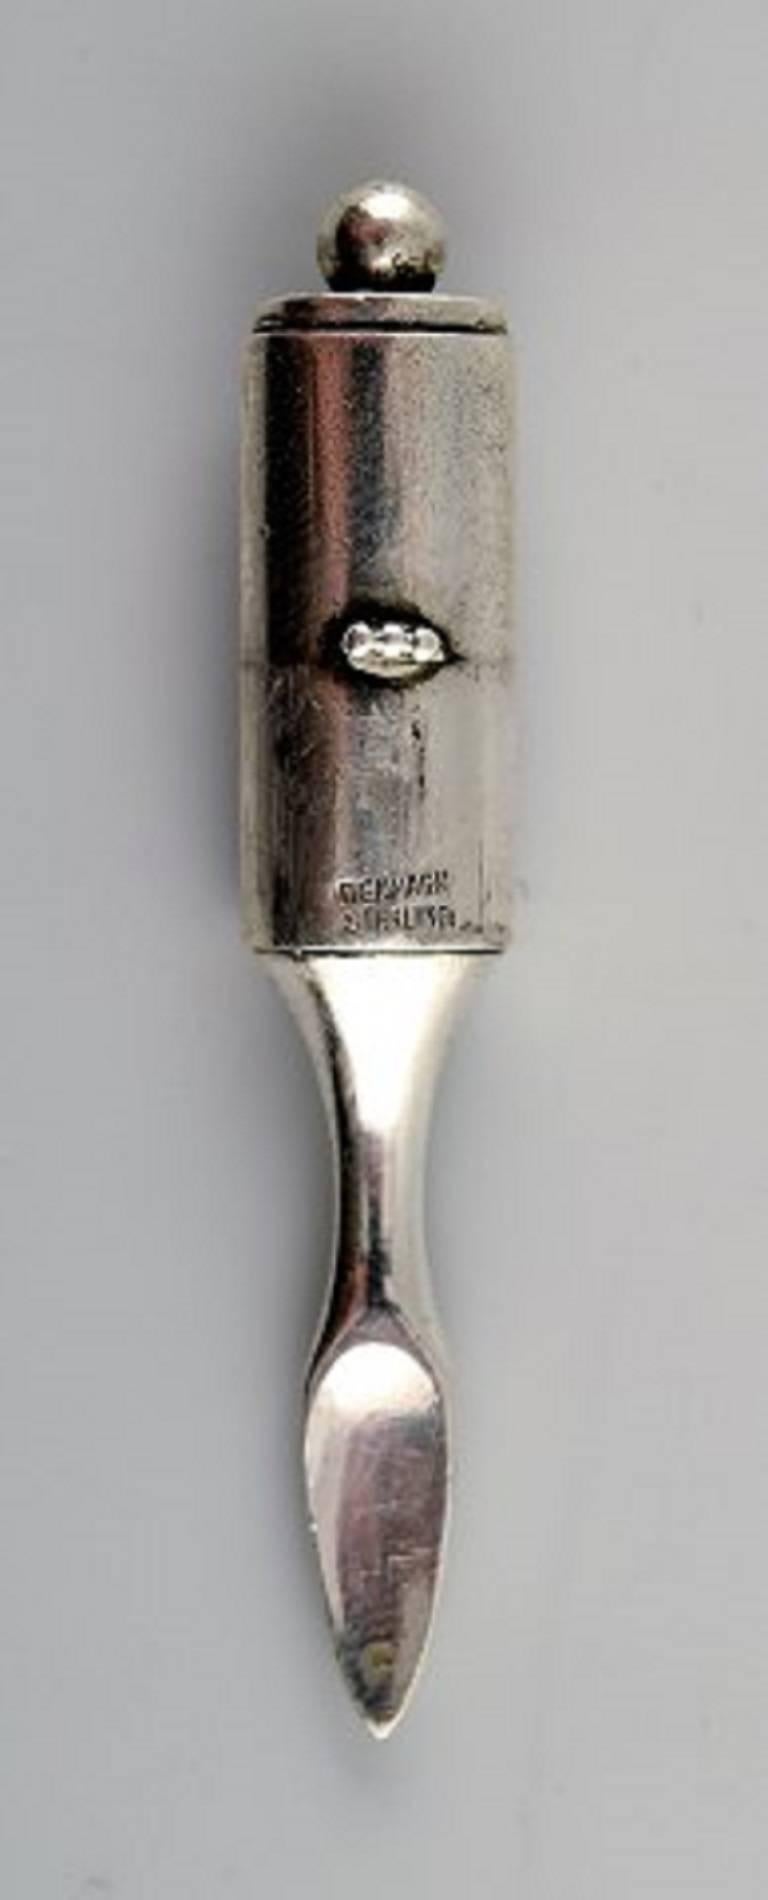 Georg Jensen. Very rare snuff spoon in sterling silver, dessin 242.

Stamped 'GJ' 1930-1945, Sterling, Denmark and no. 242.

Length. 6-8.5 cm. weight 14 g.

In good condition.